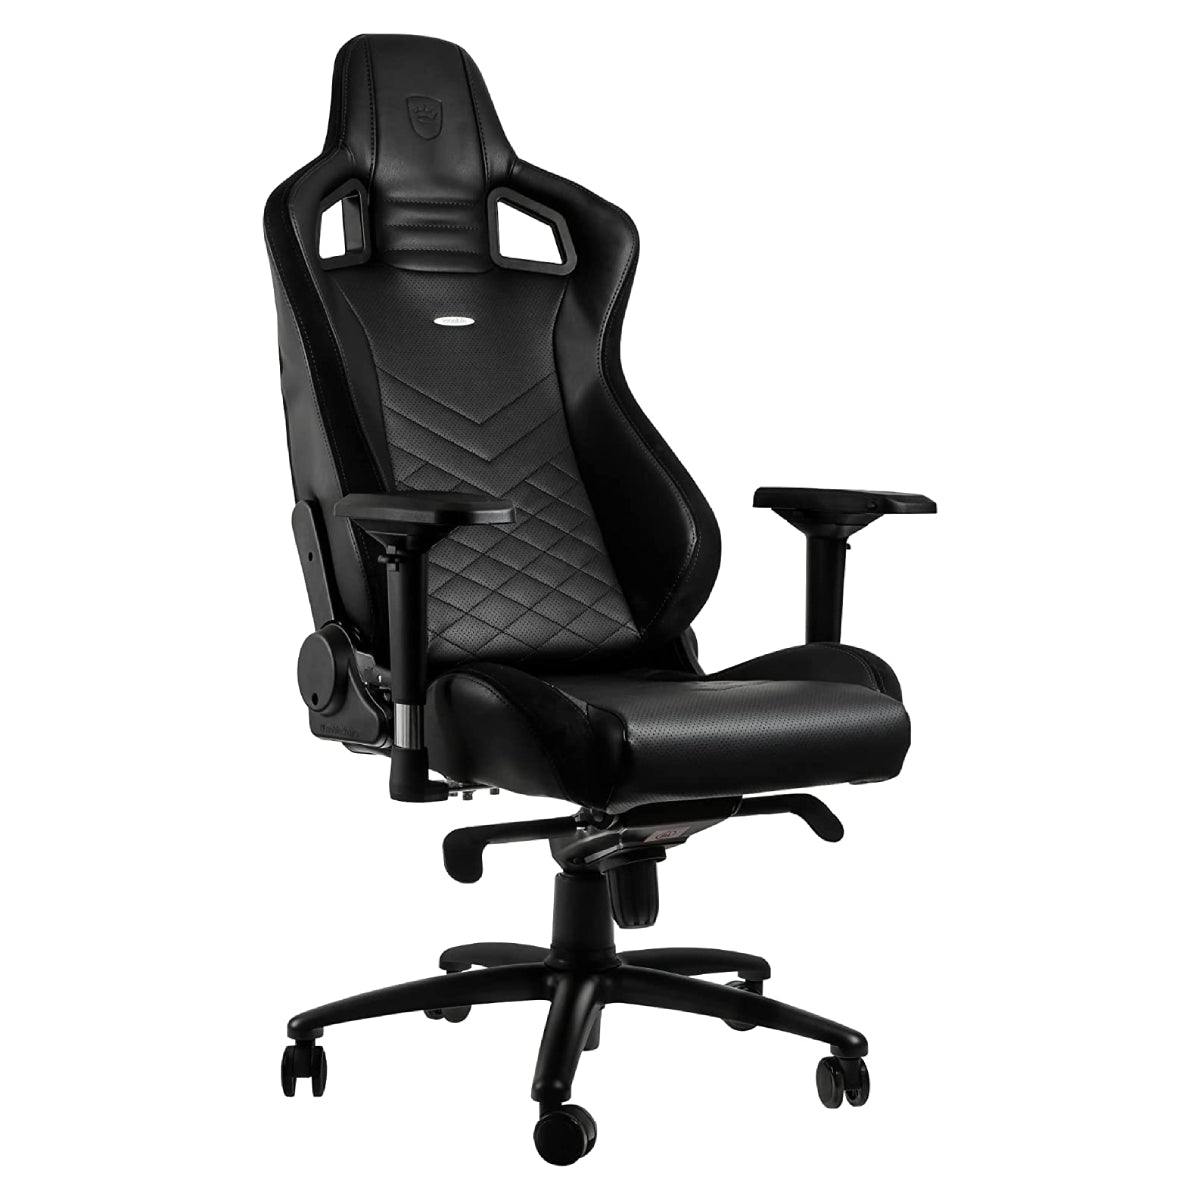 Noble Chairs Epic series - Black Leather edition - أكسسوارات - Store 974 | ستور ٩٧٤